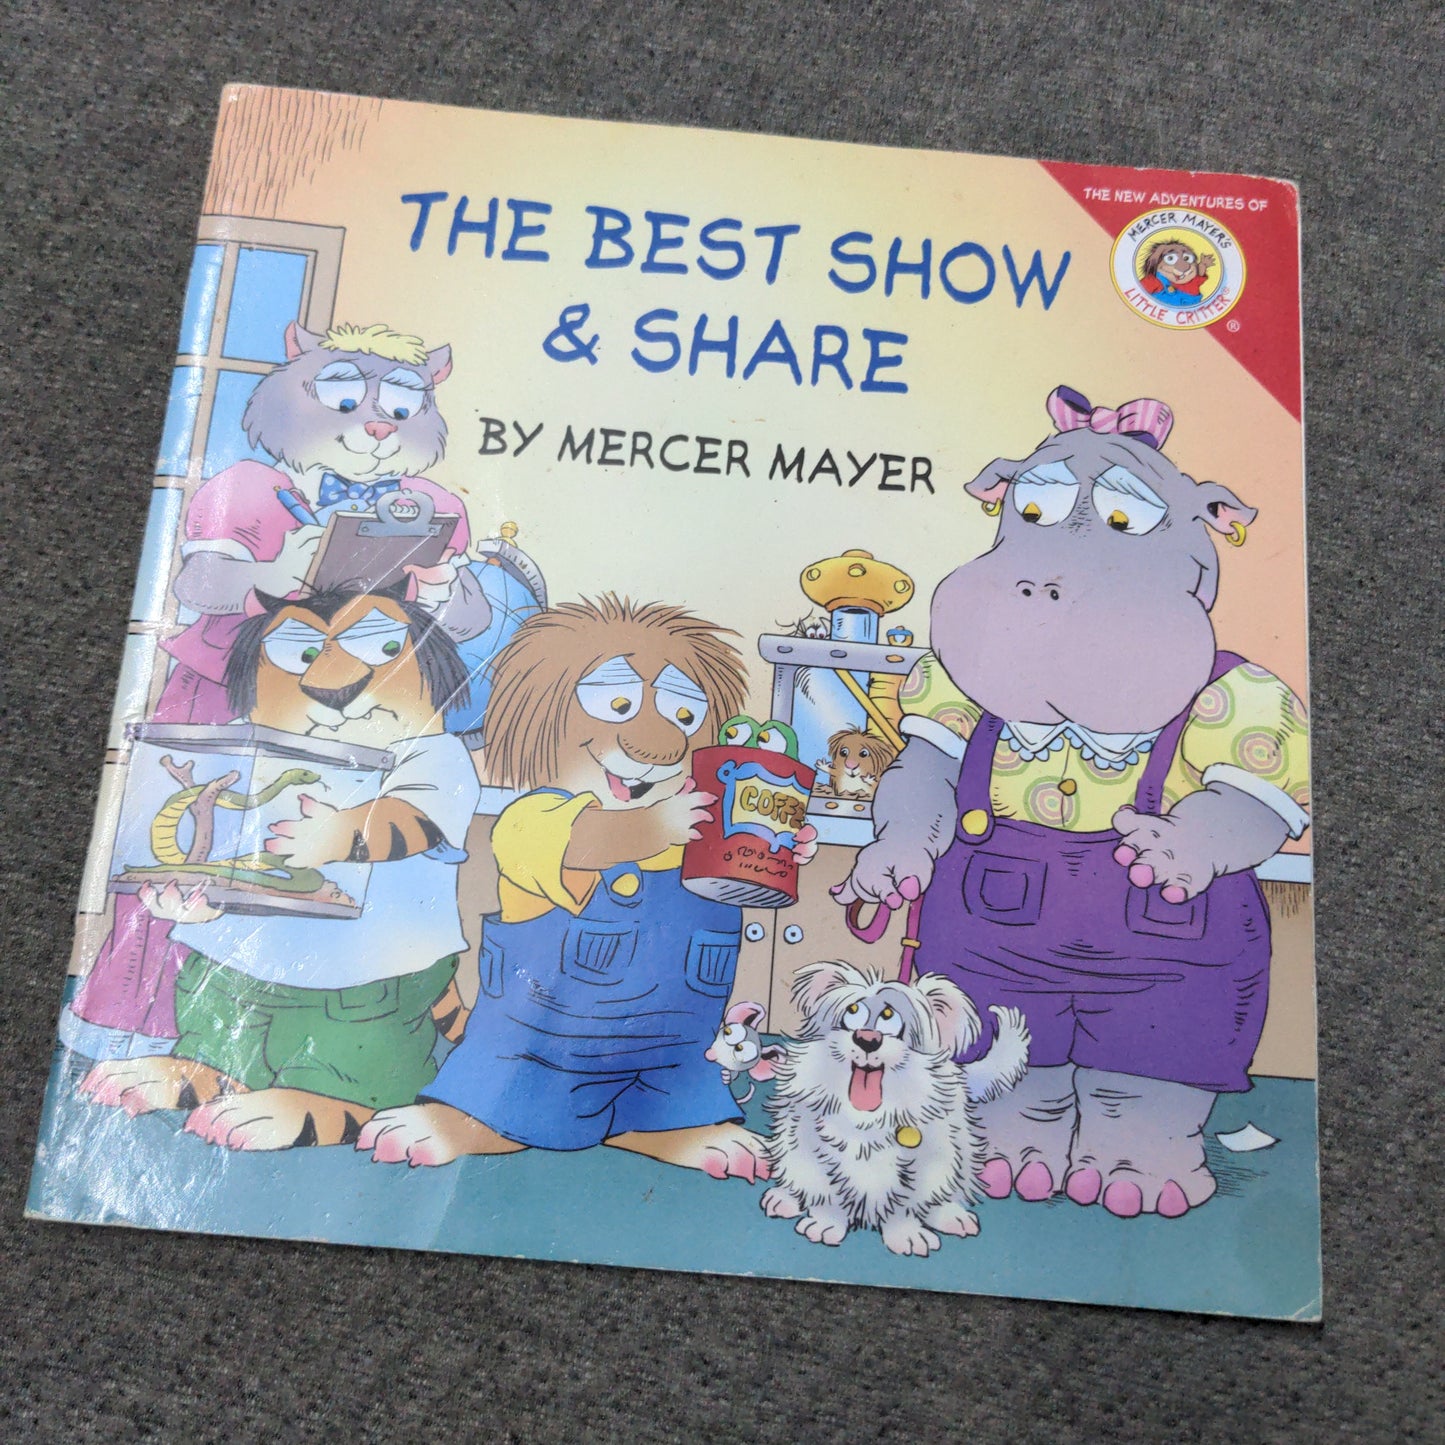 The Best Show and Share by Mercer Mayer